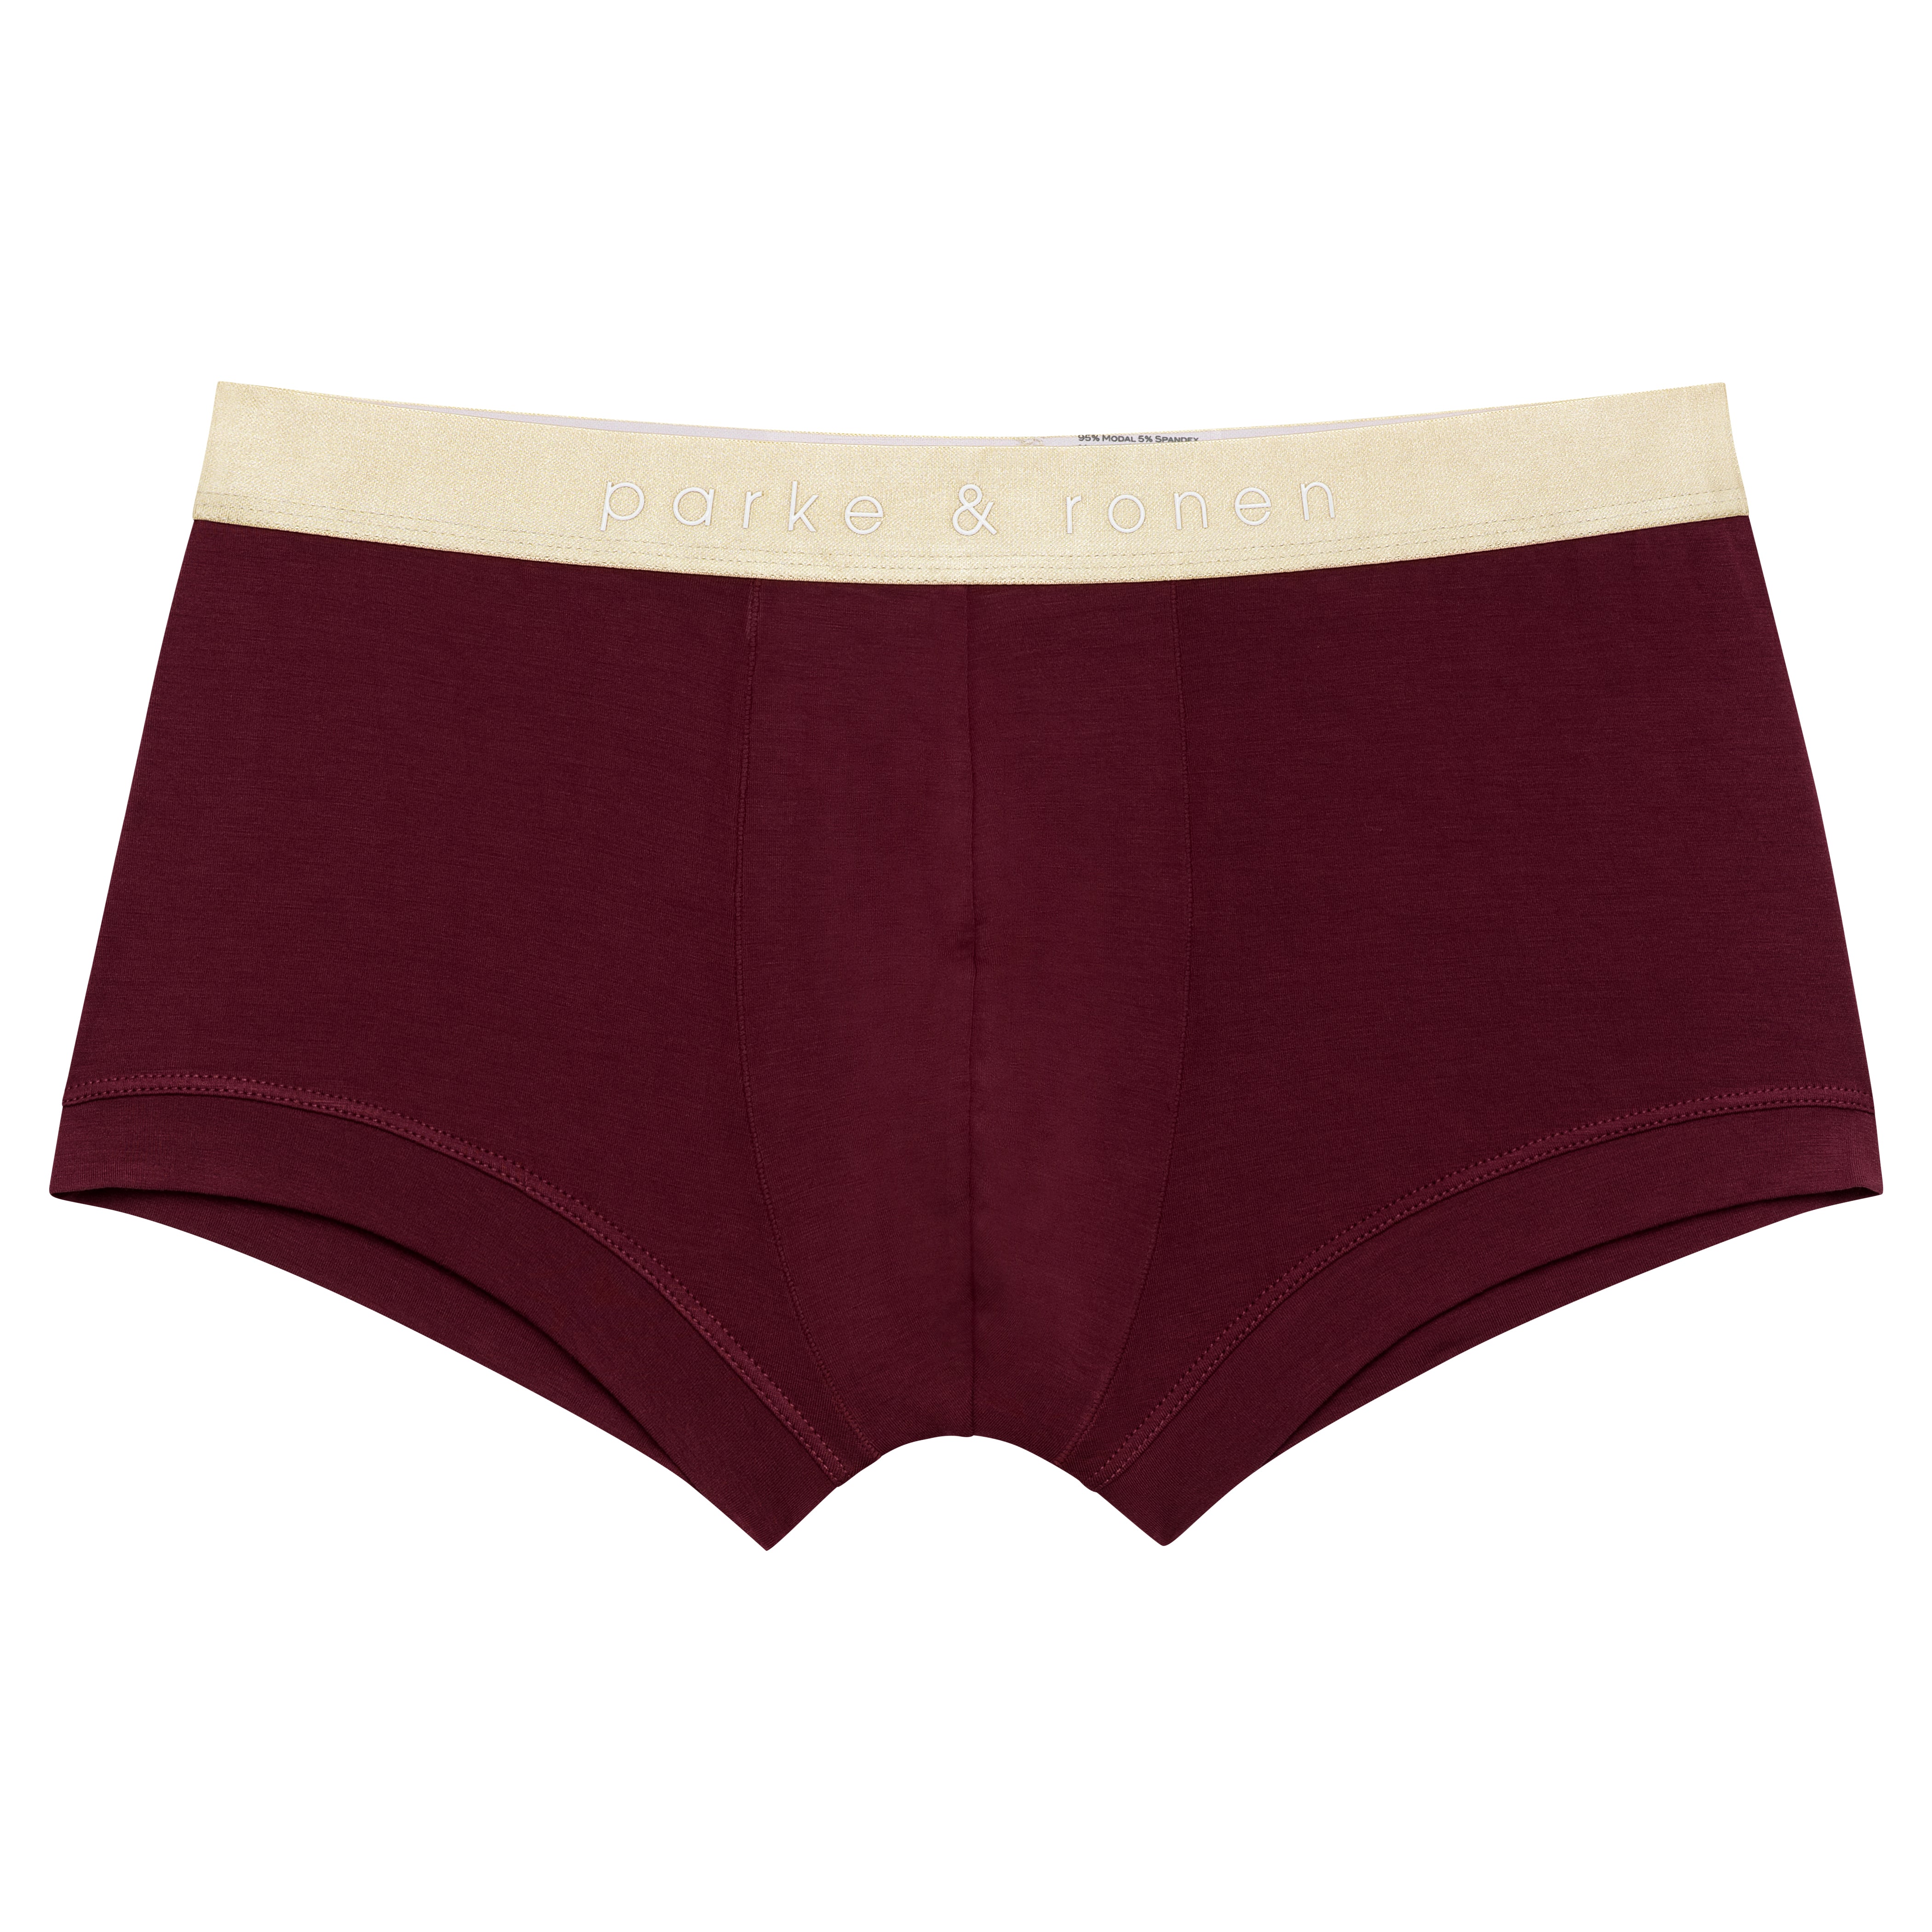 Merlot Solid Low Rise Trunk